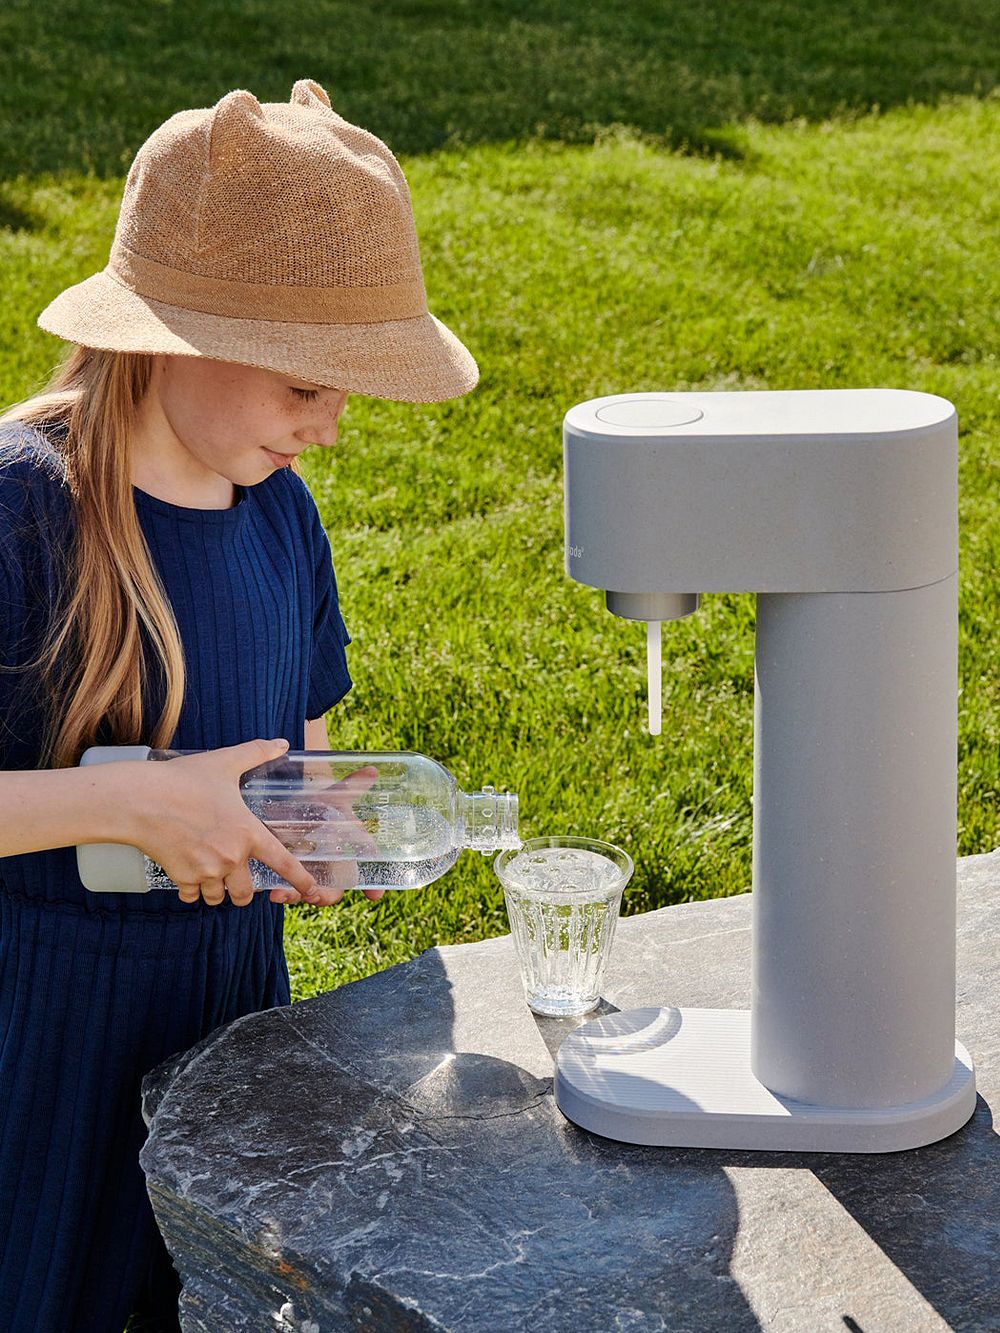 Woody sparkling water maker by Finnish brand Mysoda placed outside.